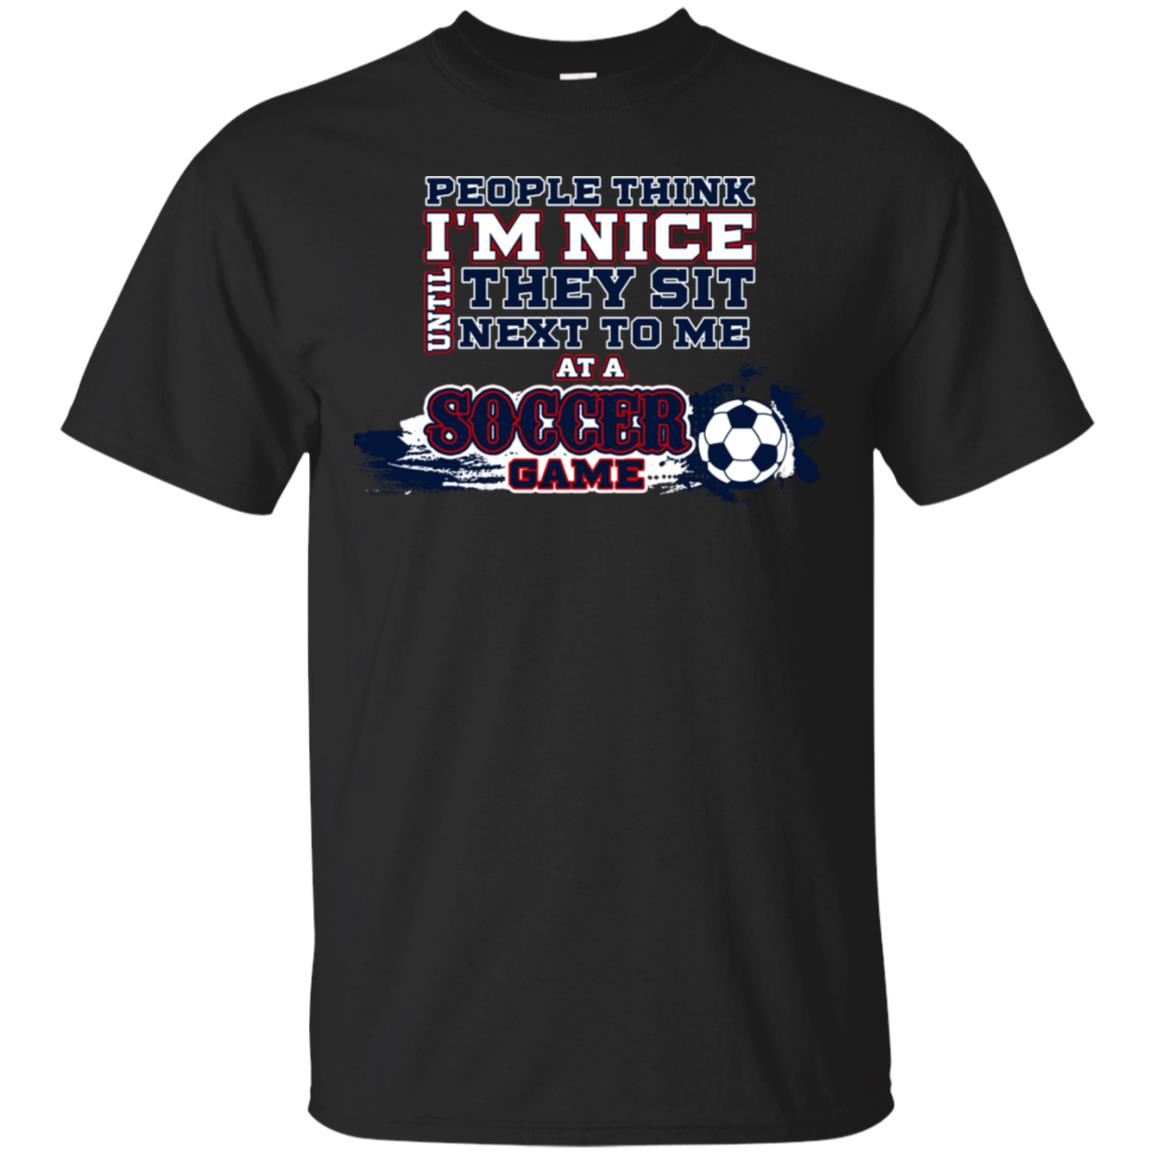 People Think I'm Nice Until They Sit Next To Me At A Soccer Game Shirt For Mens Or WomensG200 Gildan Ultra Cotton T-Shirt